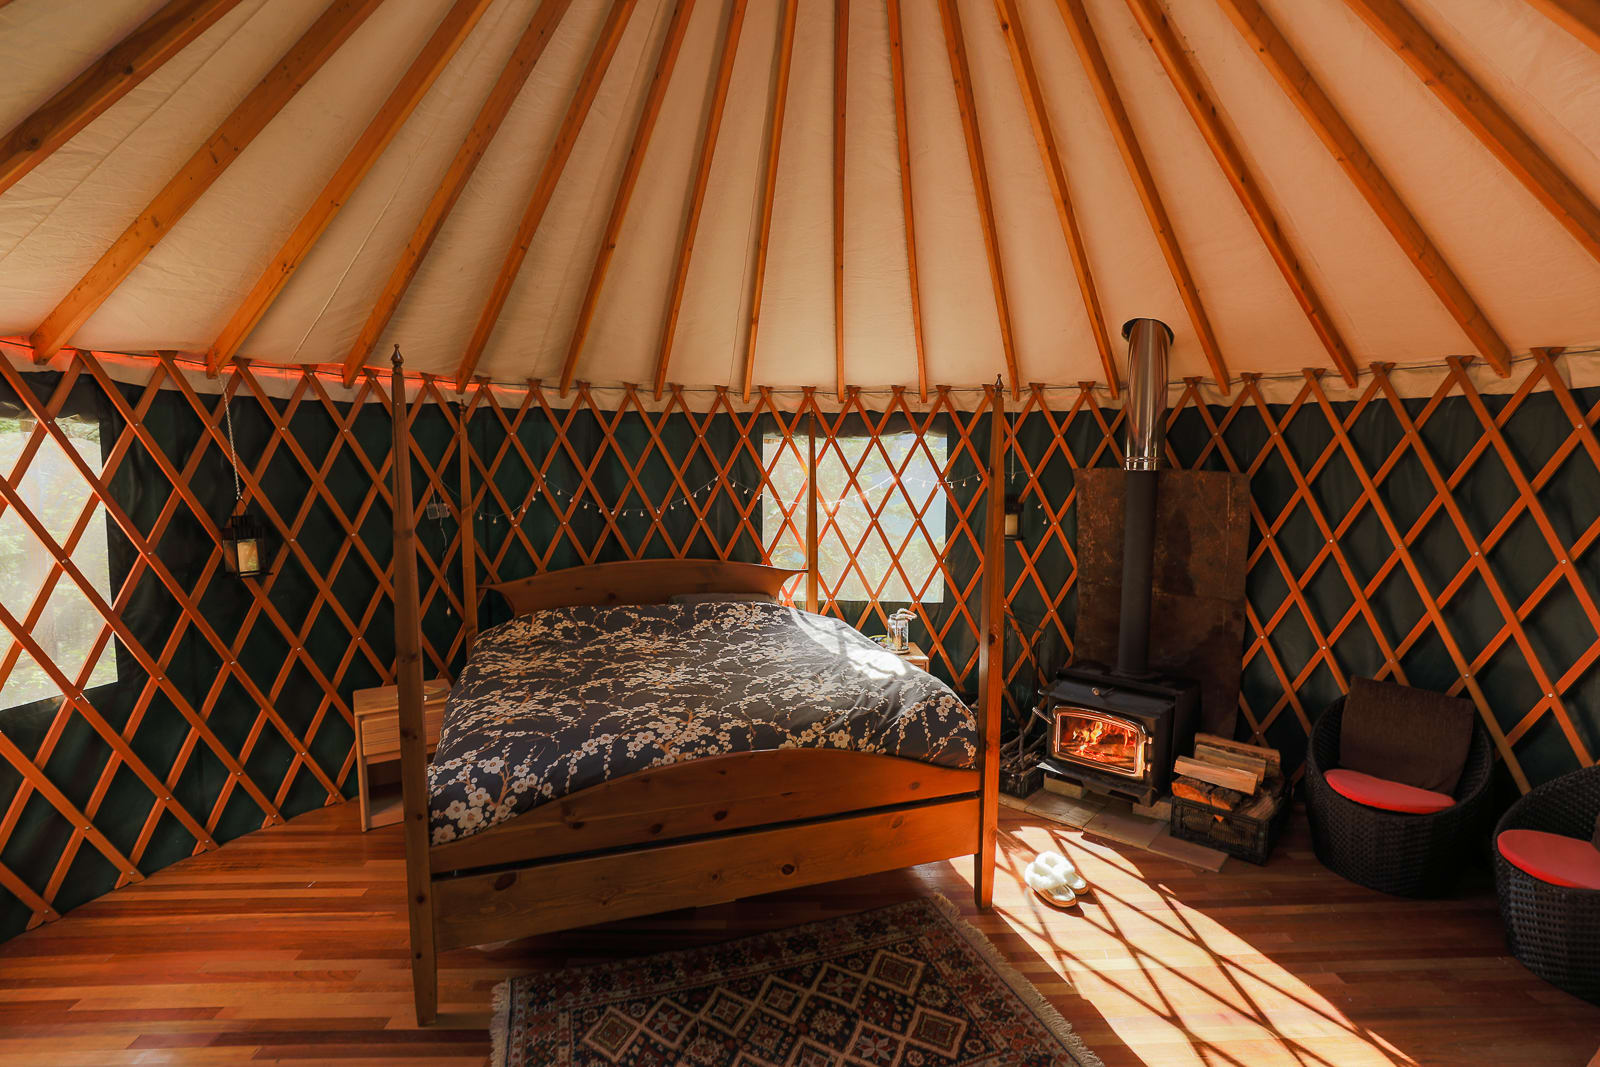 The Yurt has a king size bed and ample space for you to move around in.